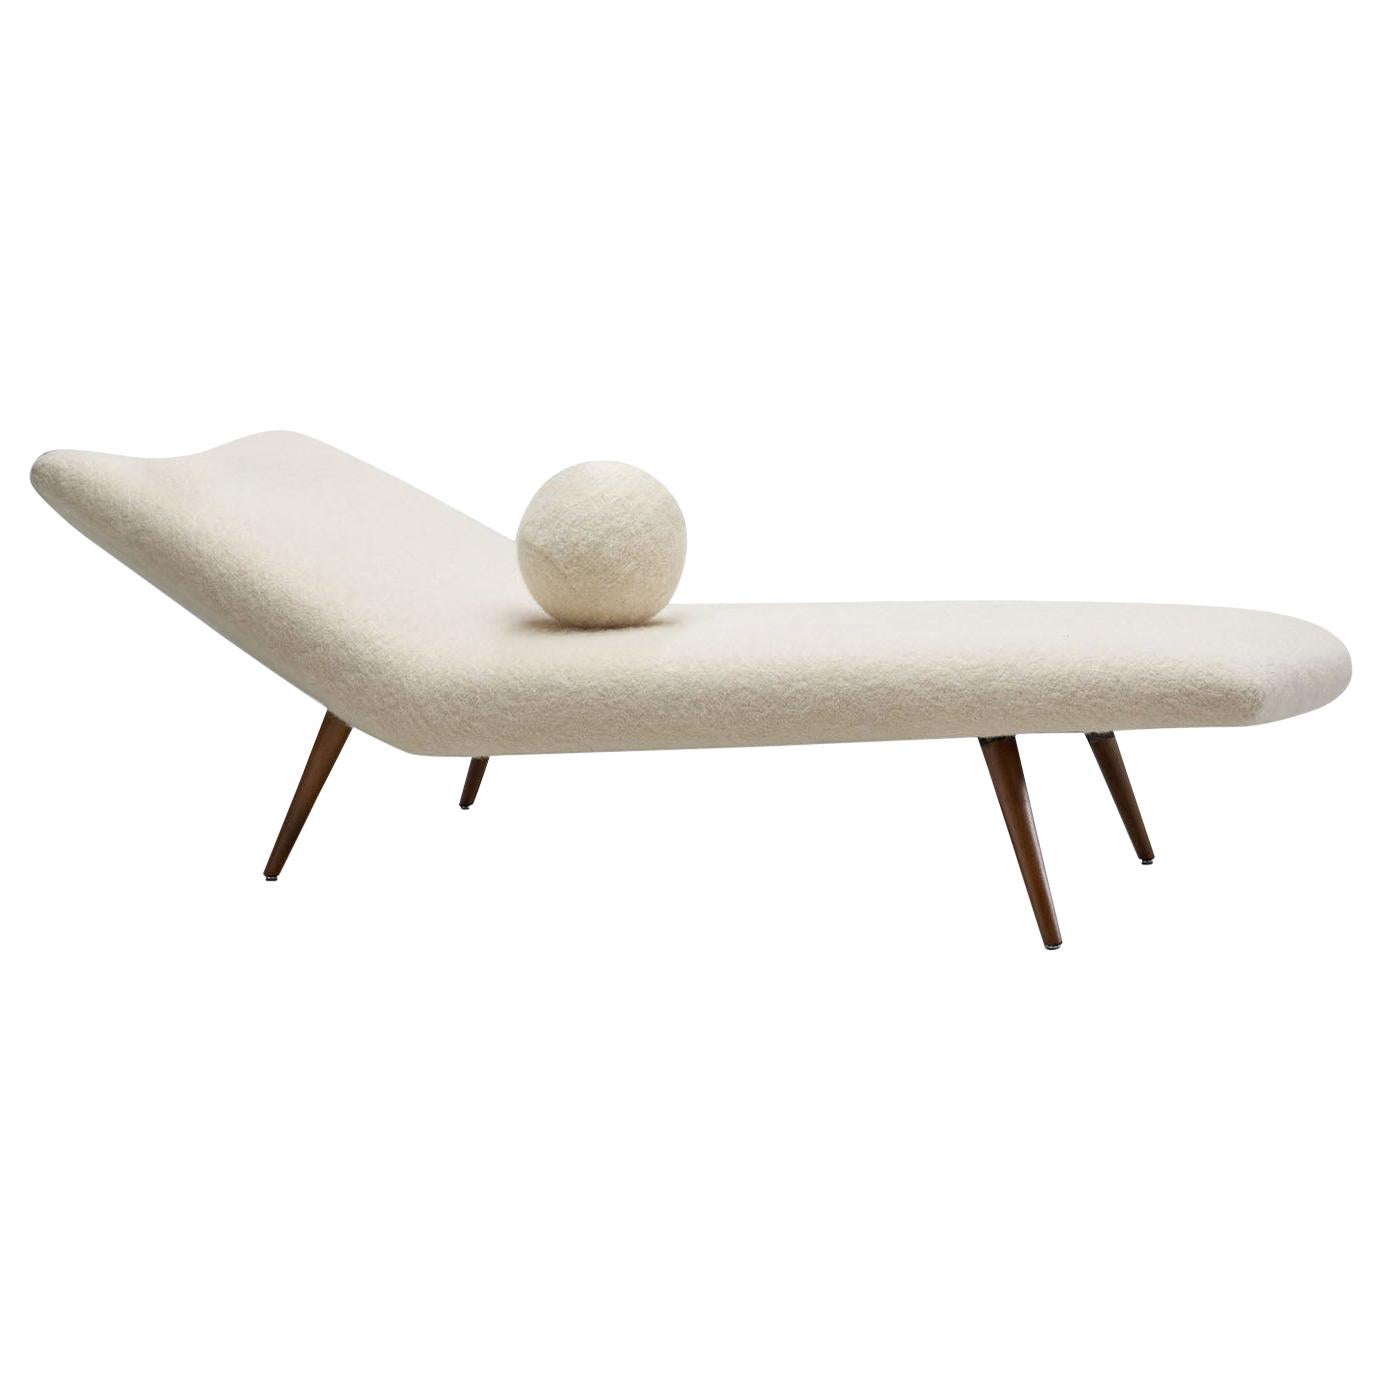 Theo Ruth Daybed for Eugen Schmidt Soloform, the Netherlands, 1947